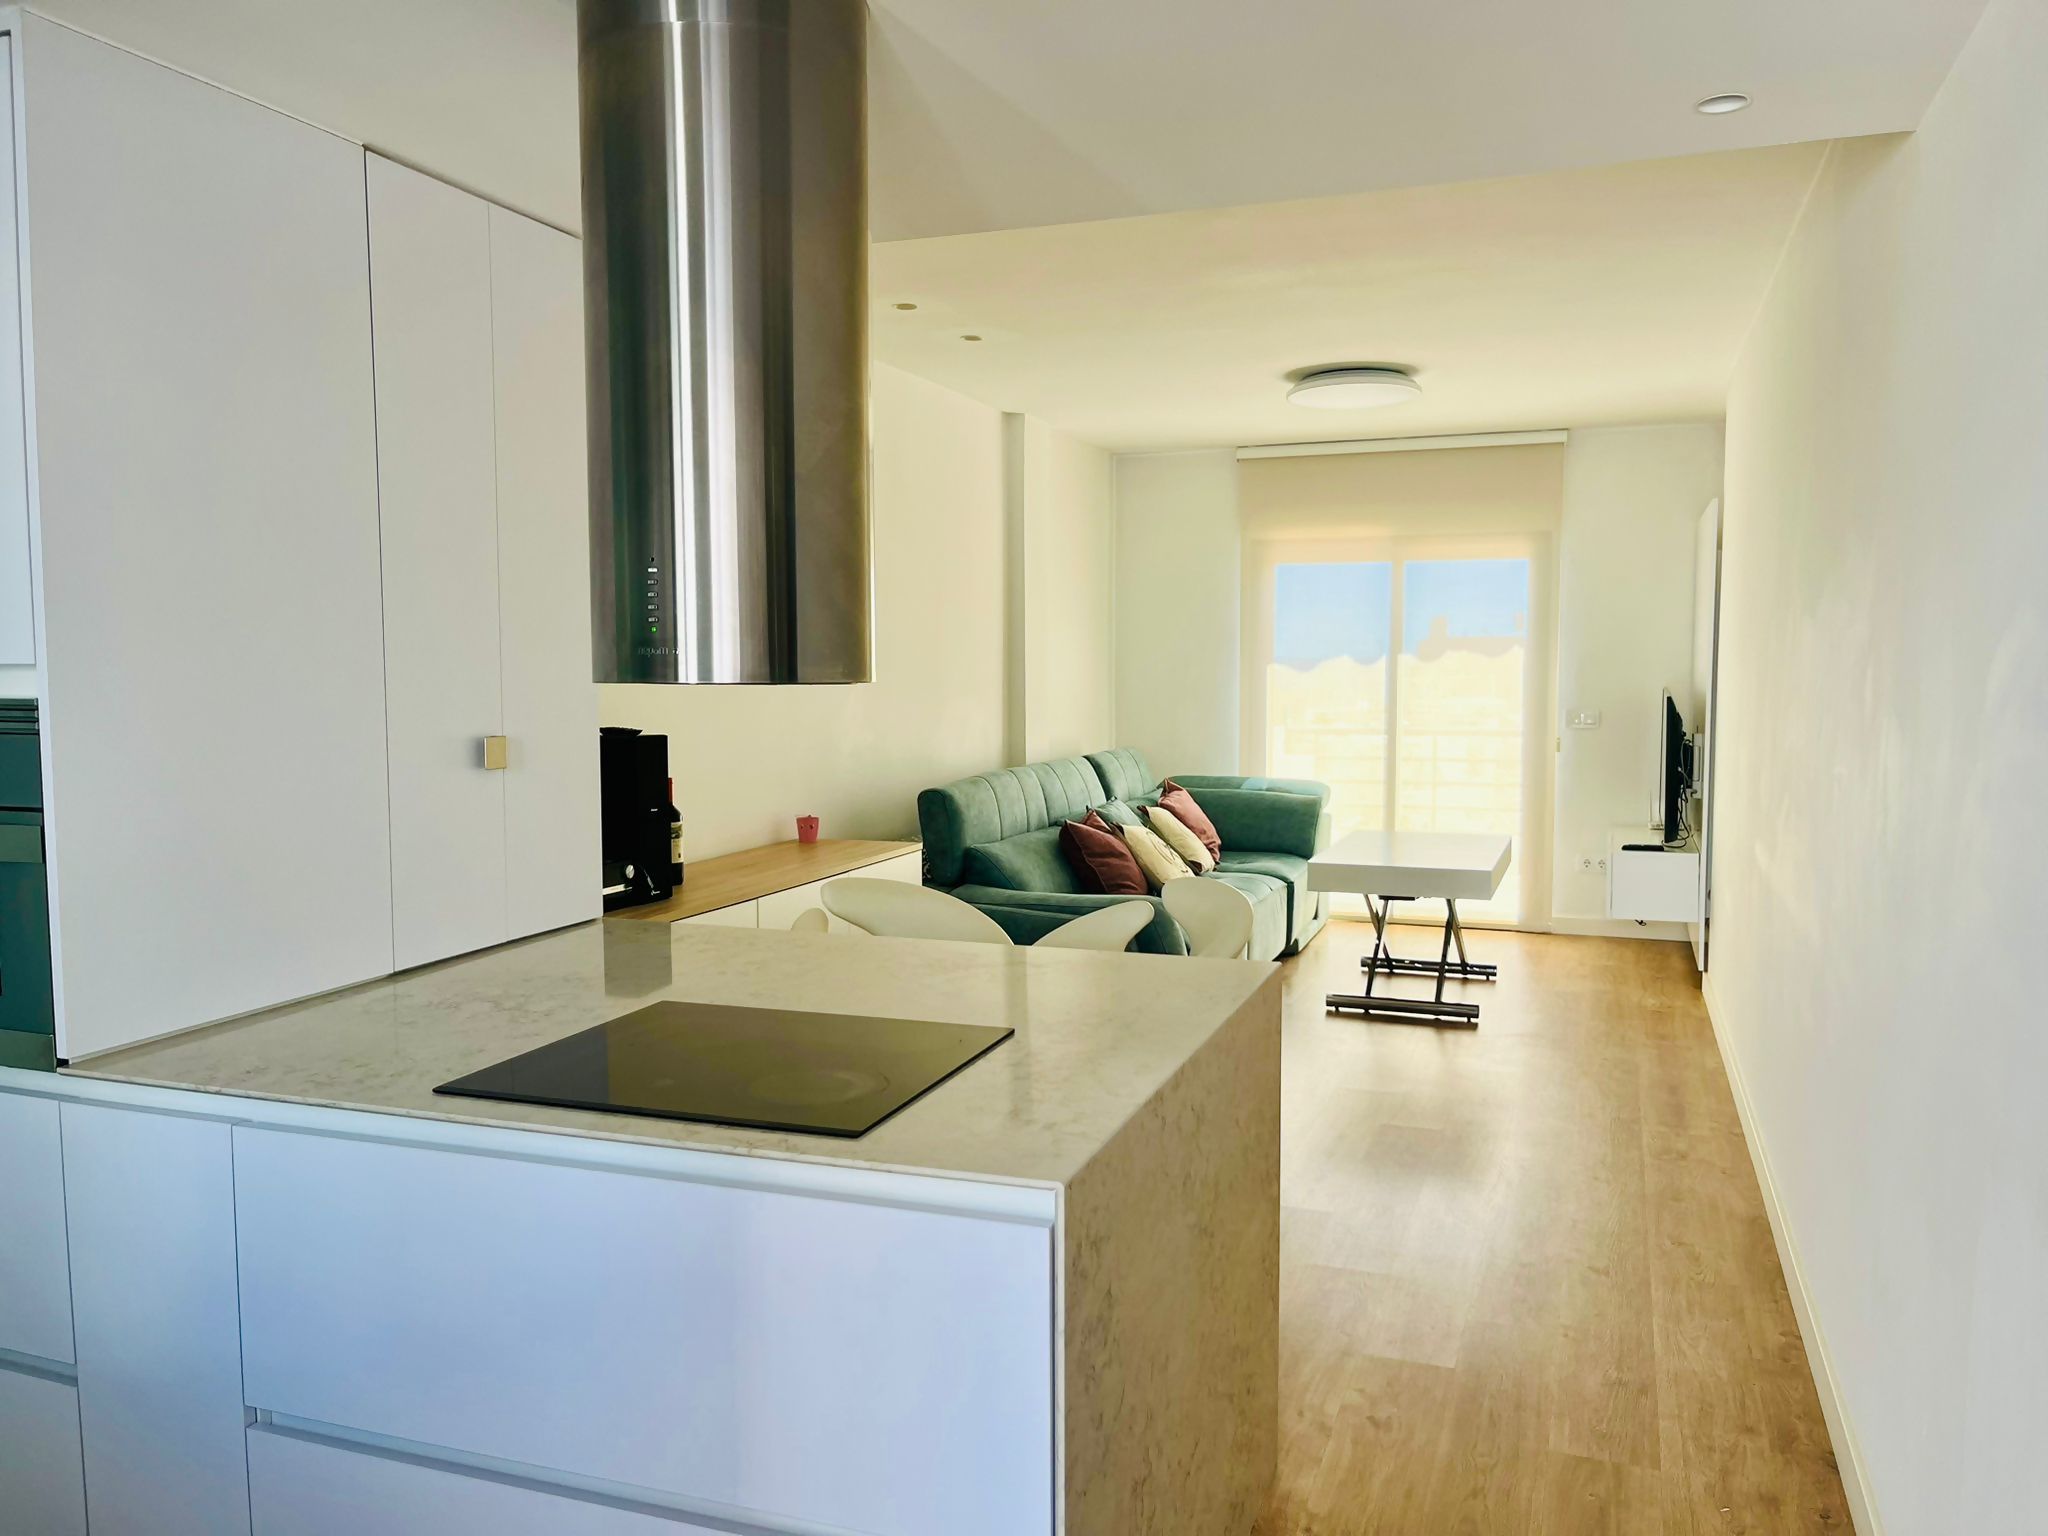 Luxury apartment by the sea: Apartment for Rent in Mojácar, Almería